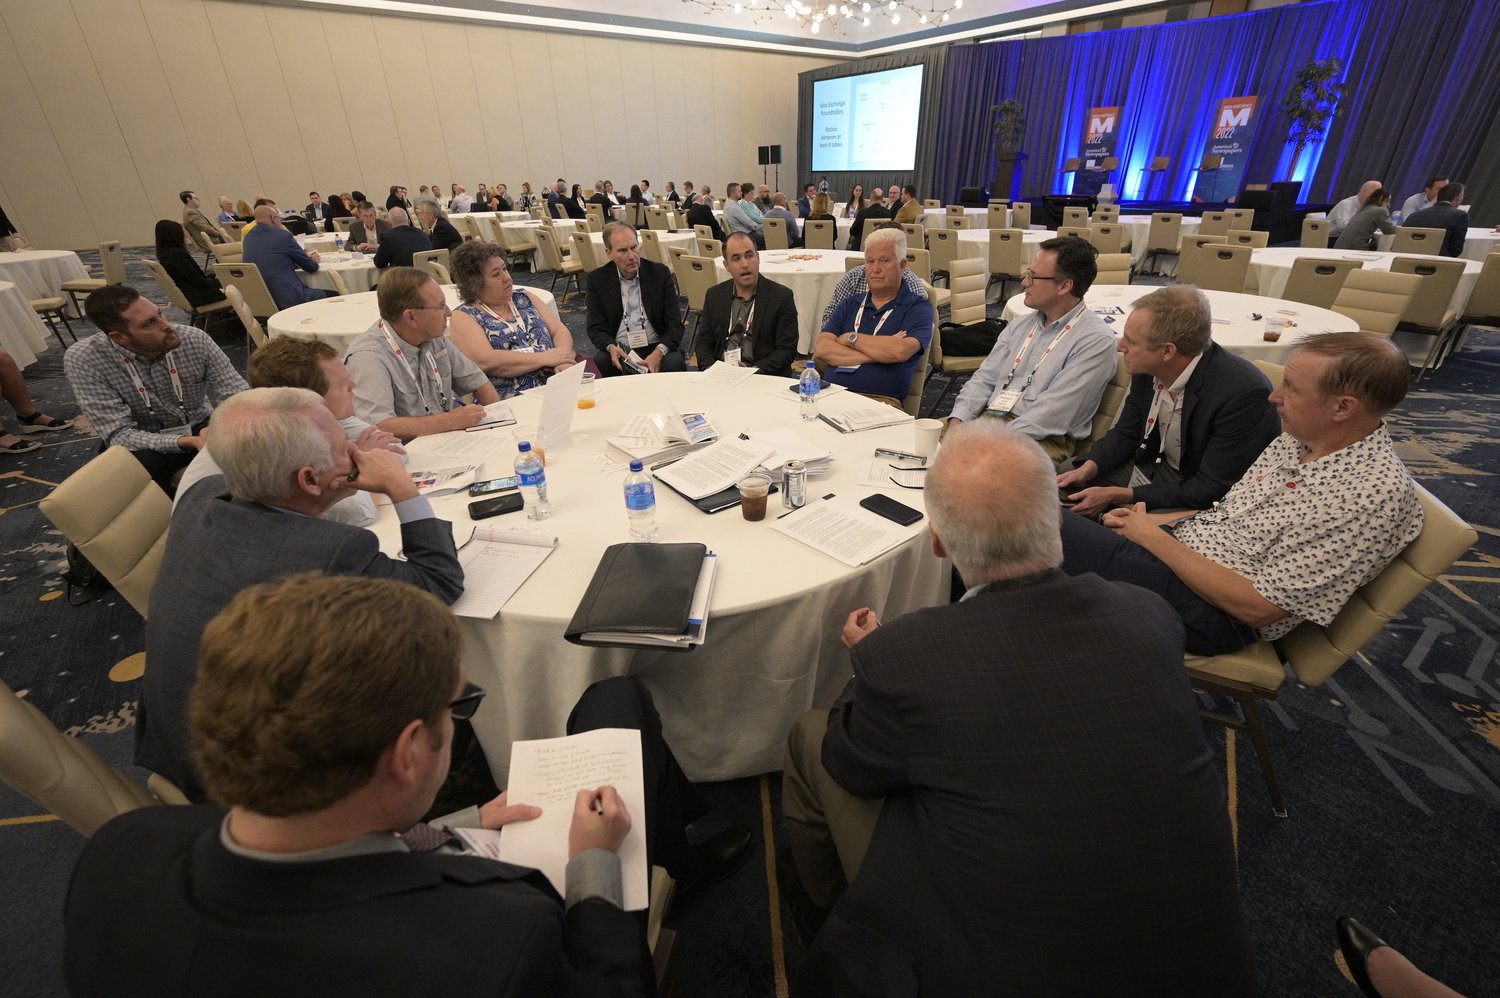 Participants at this Roundtable went home with an abundance of print revenue ideas, thanks to an innovative pre-conference approach by moderator David Dunn-Rankin, manager, D-R Media. (Photo by Phelan M. Ebenhack)